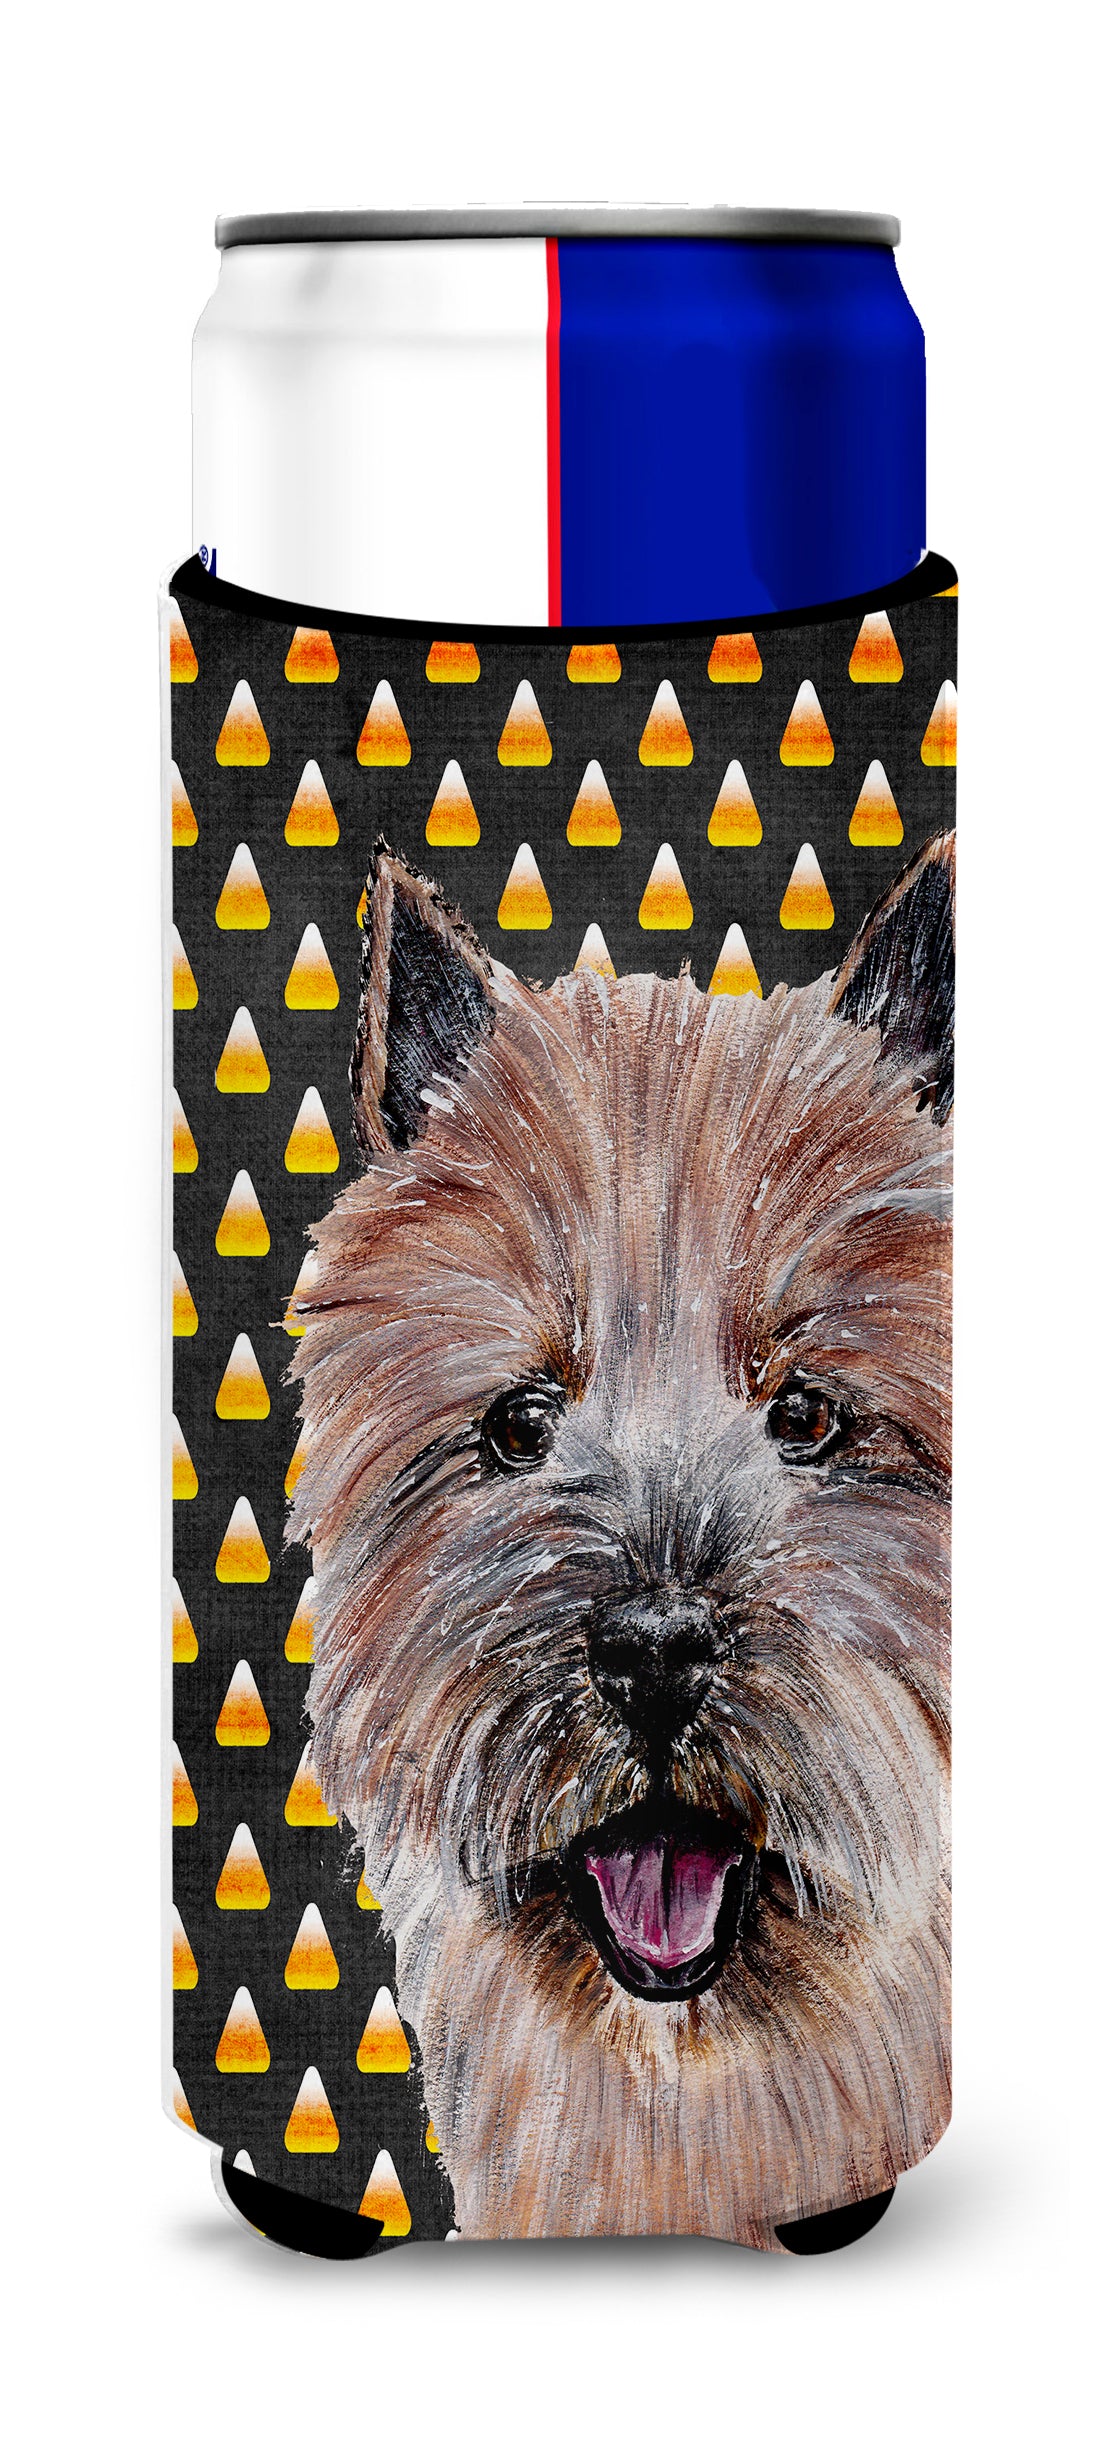 Norwich Terrier Candy Corn Halloween Ultra Beverage Insulators for slim cans SC9662MUK.